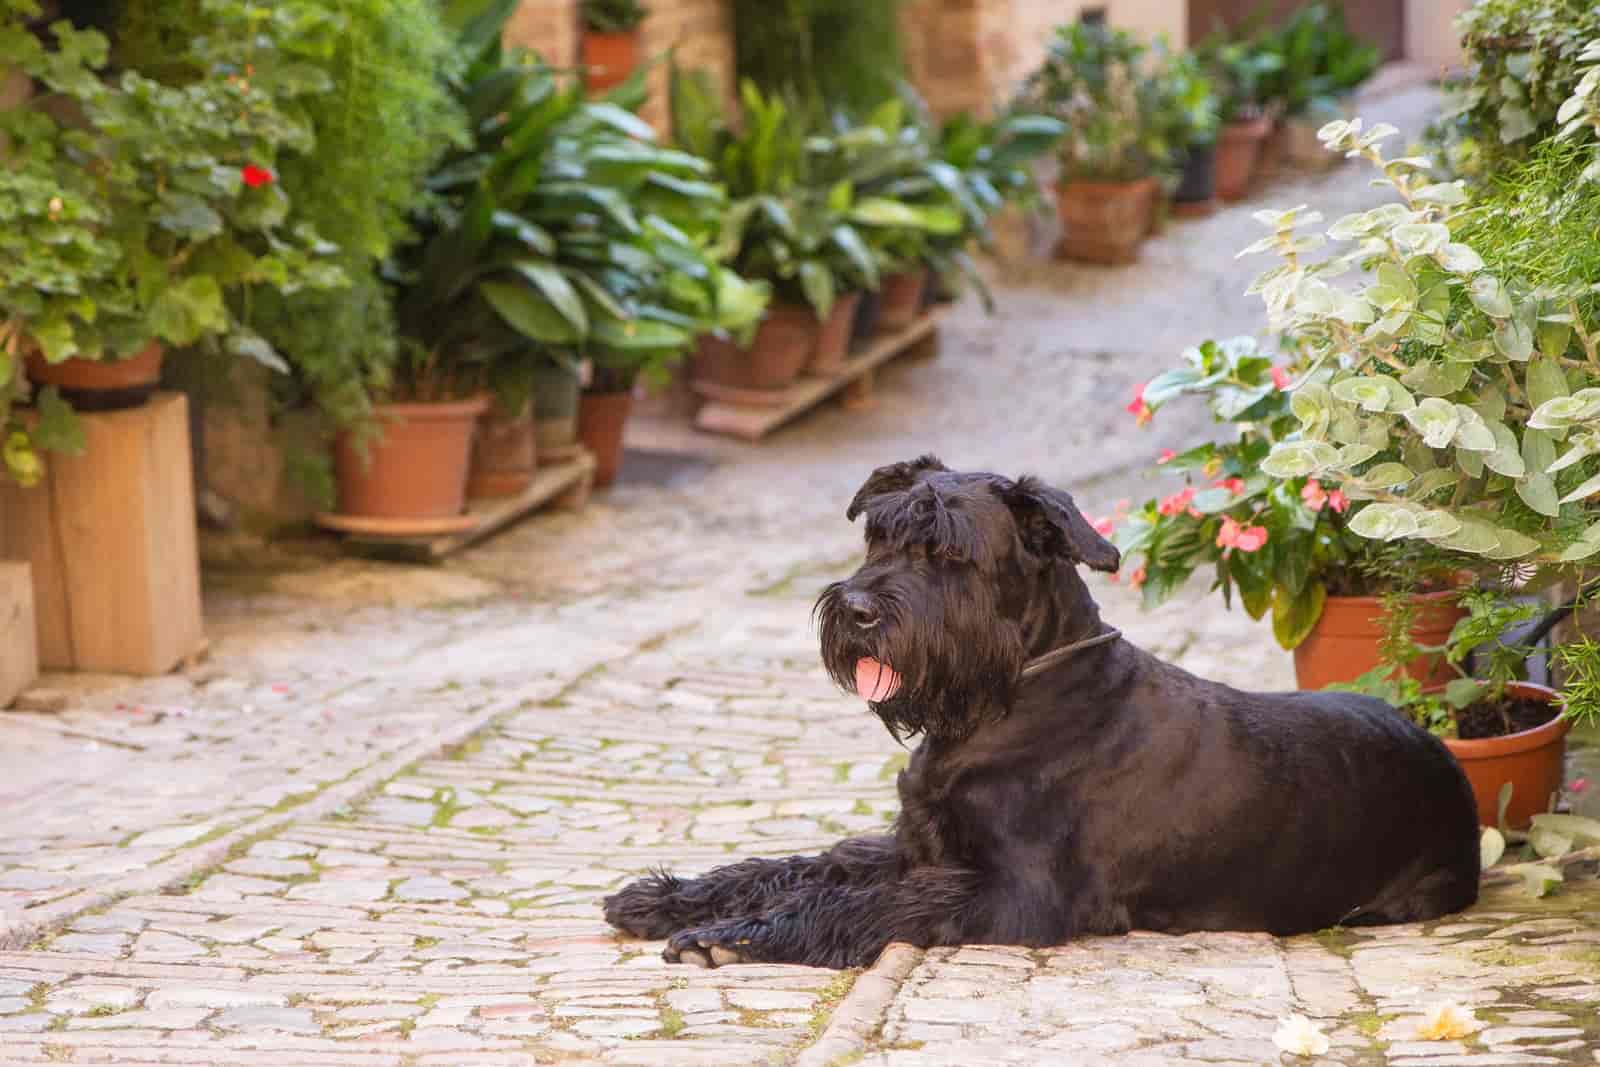 what plants are most poisonous to dogs